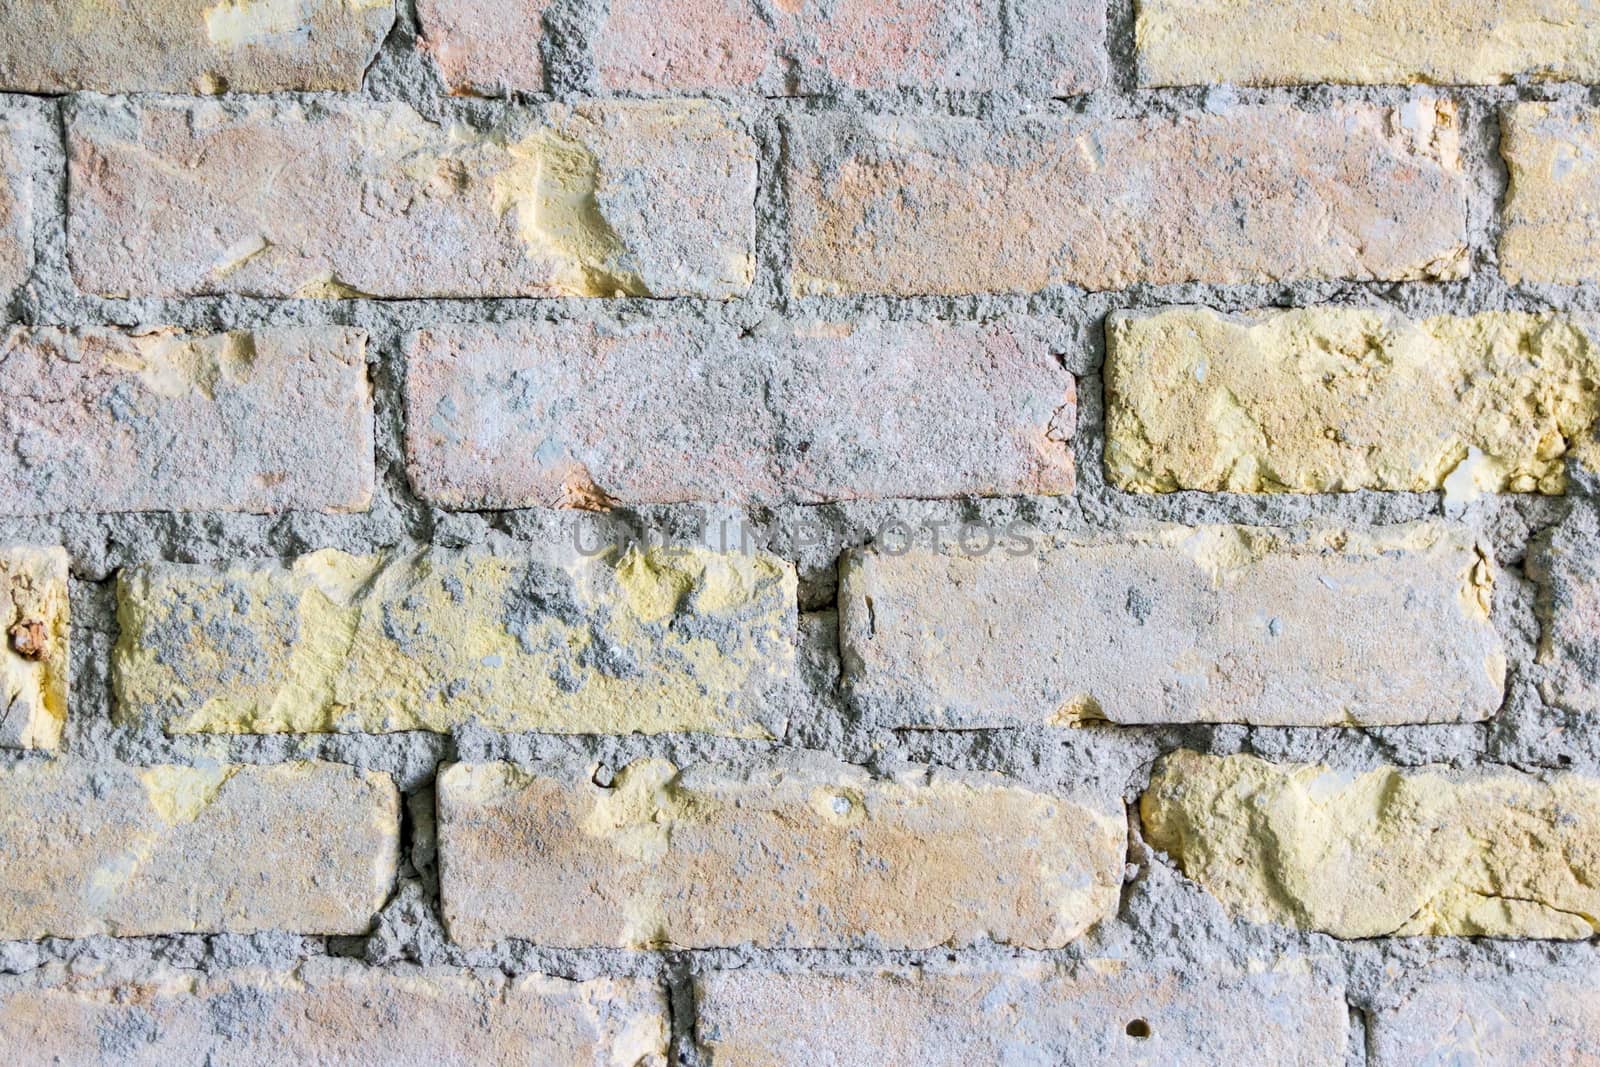 Photograph of a brick wall texture or background